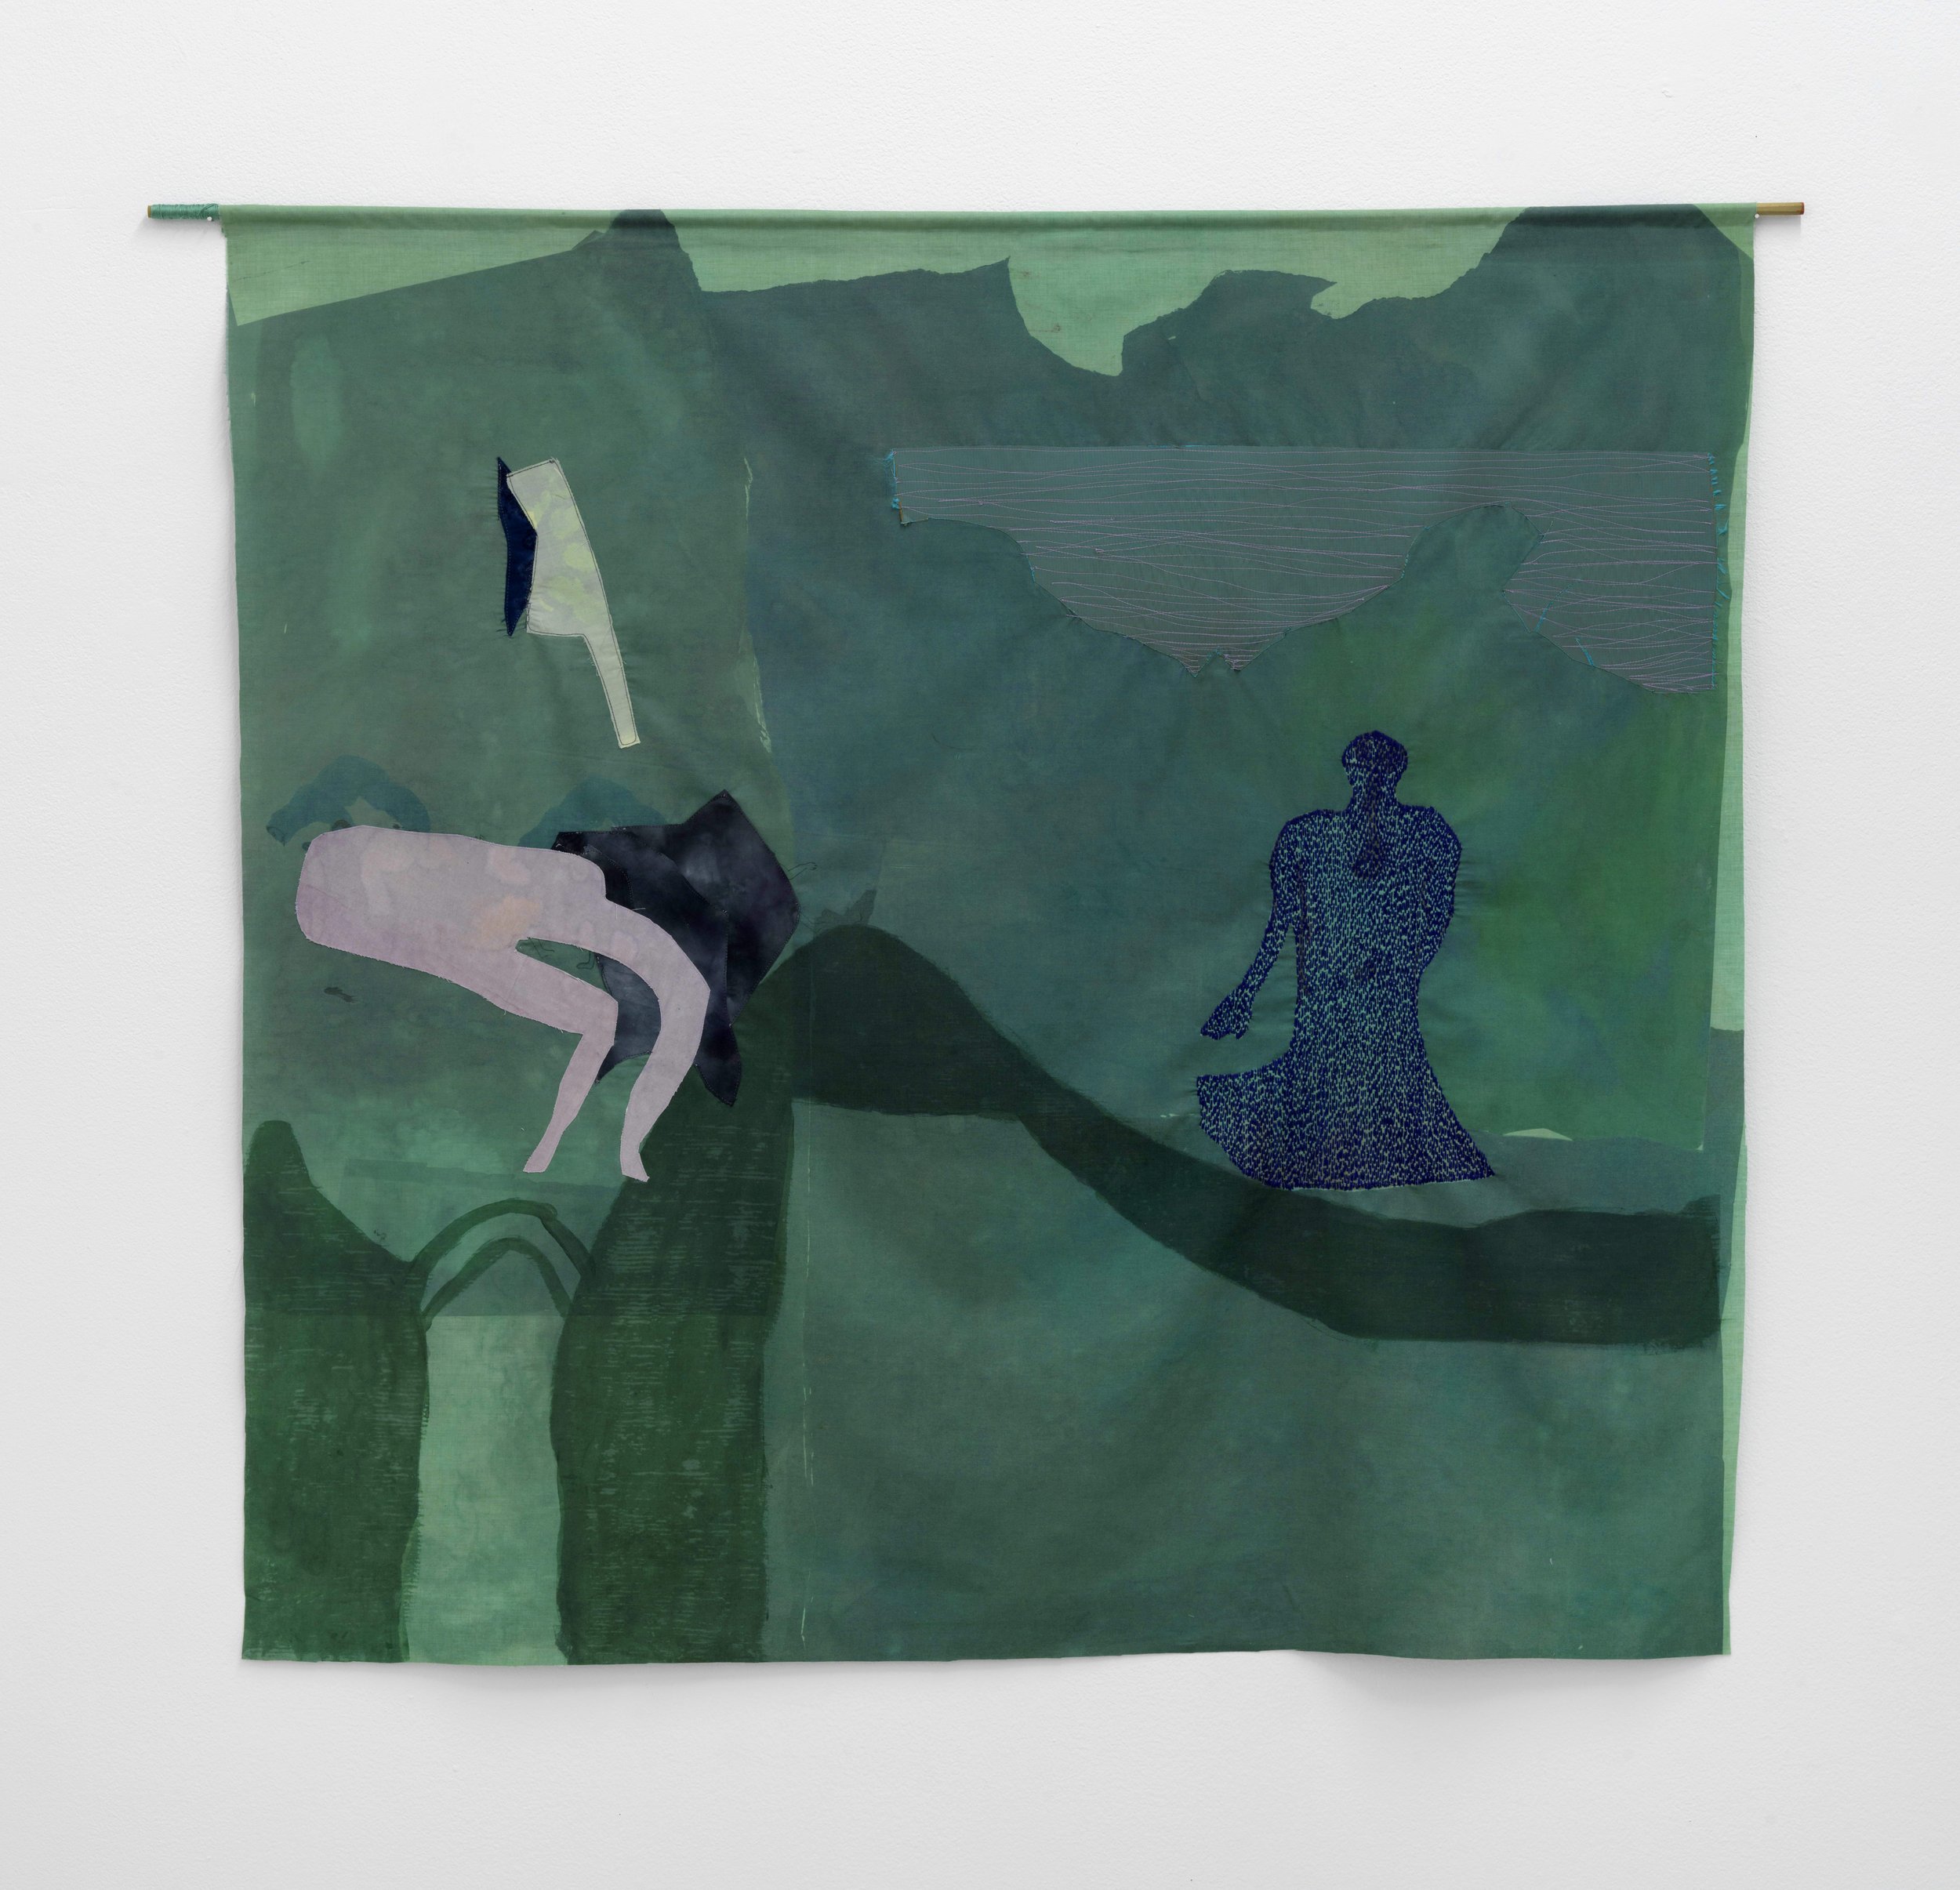  Slip Through, 2023, Hand stitched embroidery, Hand dyed Fabric, Appliquéd cotton fabric, sublimation printing, 43 x 68 inches    